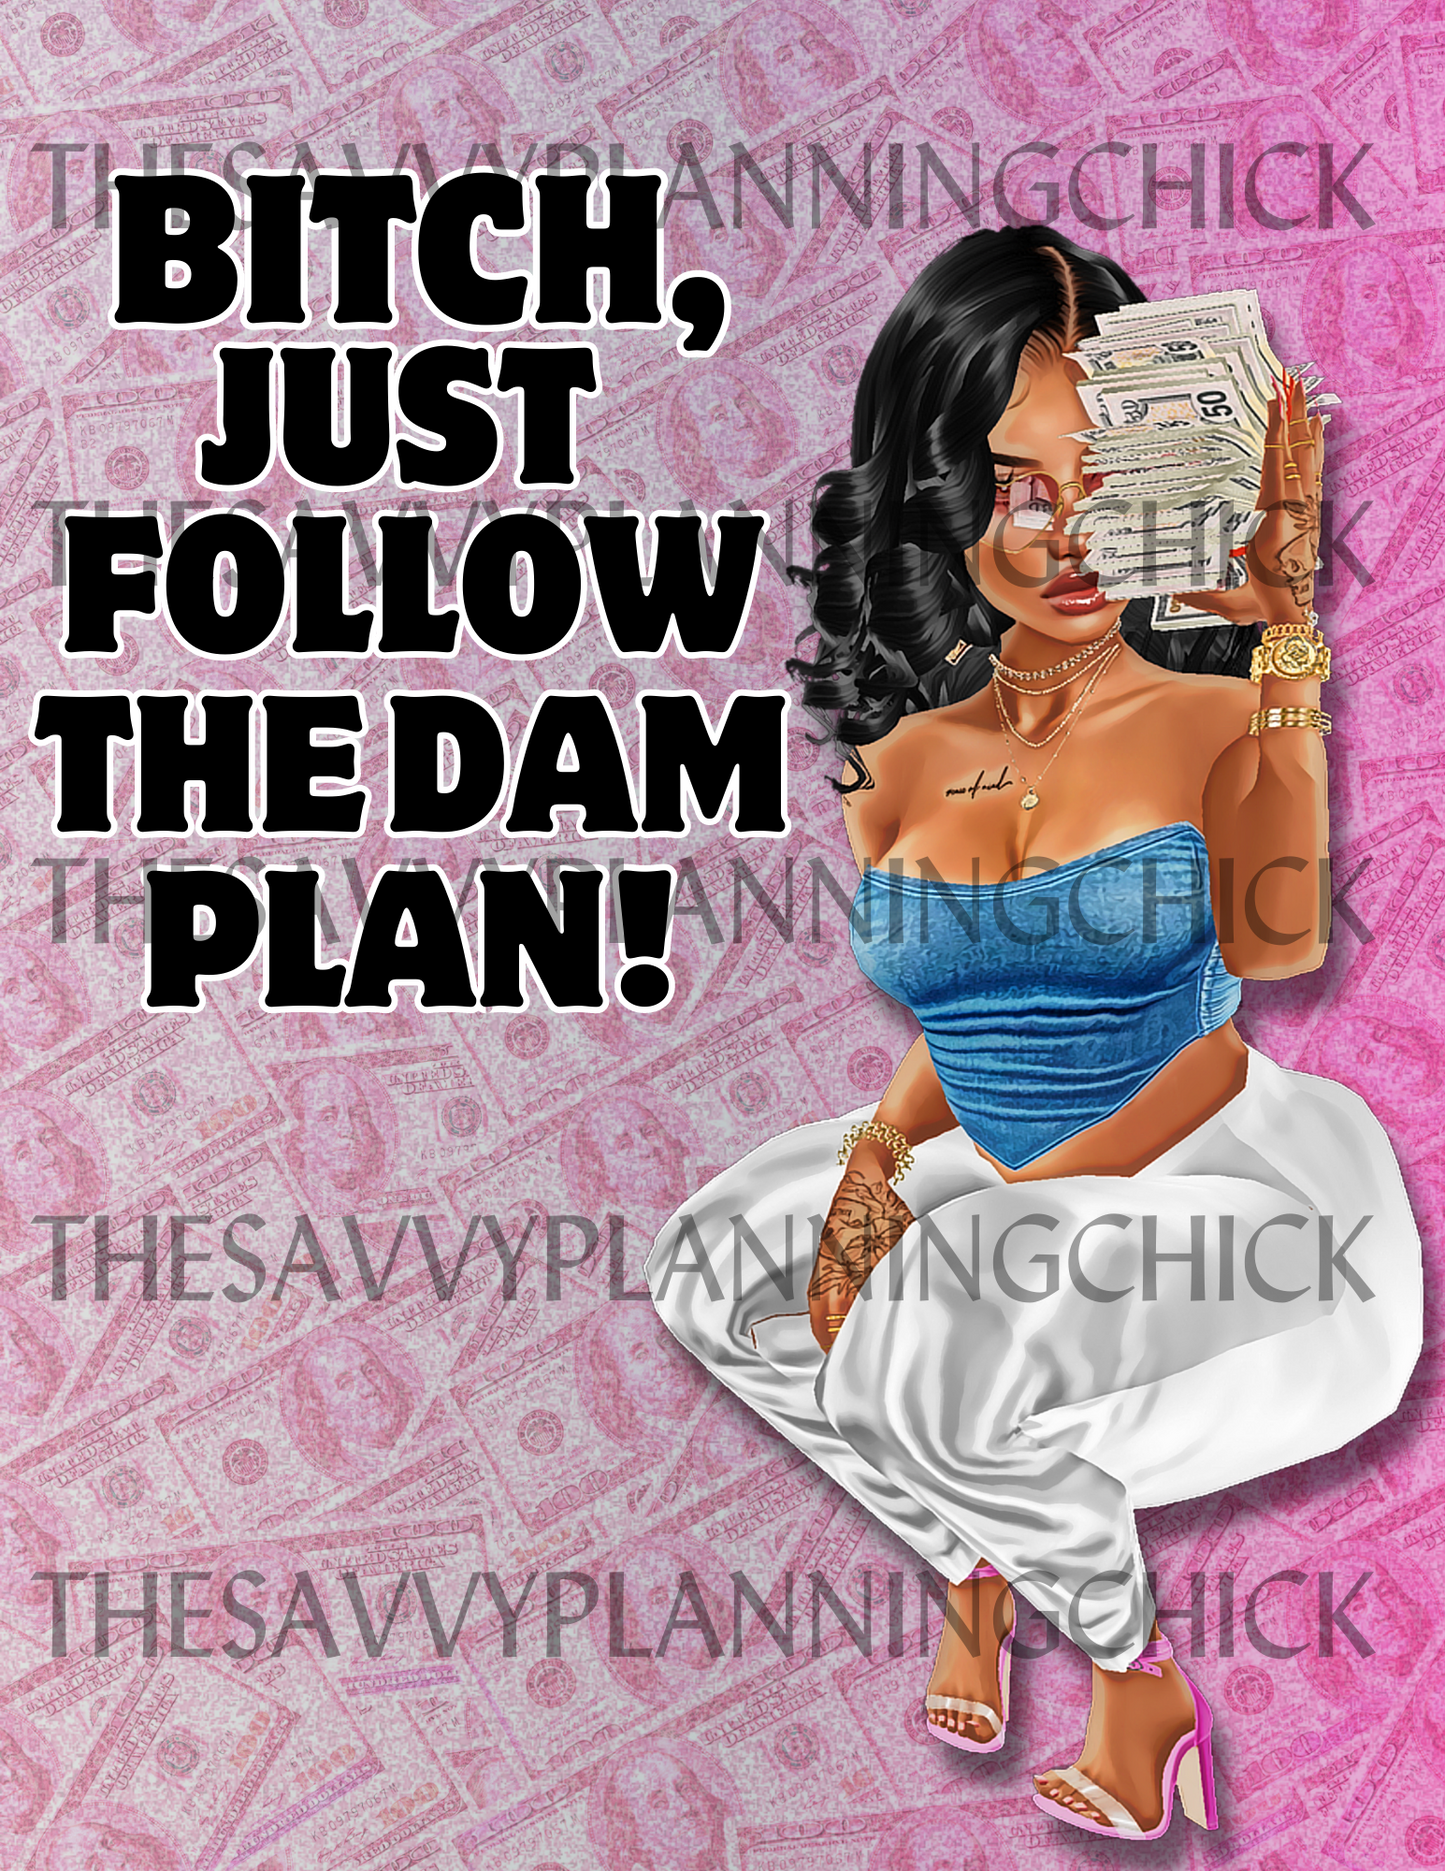 BITCH JUST FOLLOW THE PLAN COVER ONLY PLR